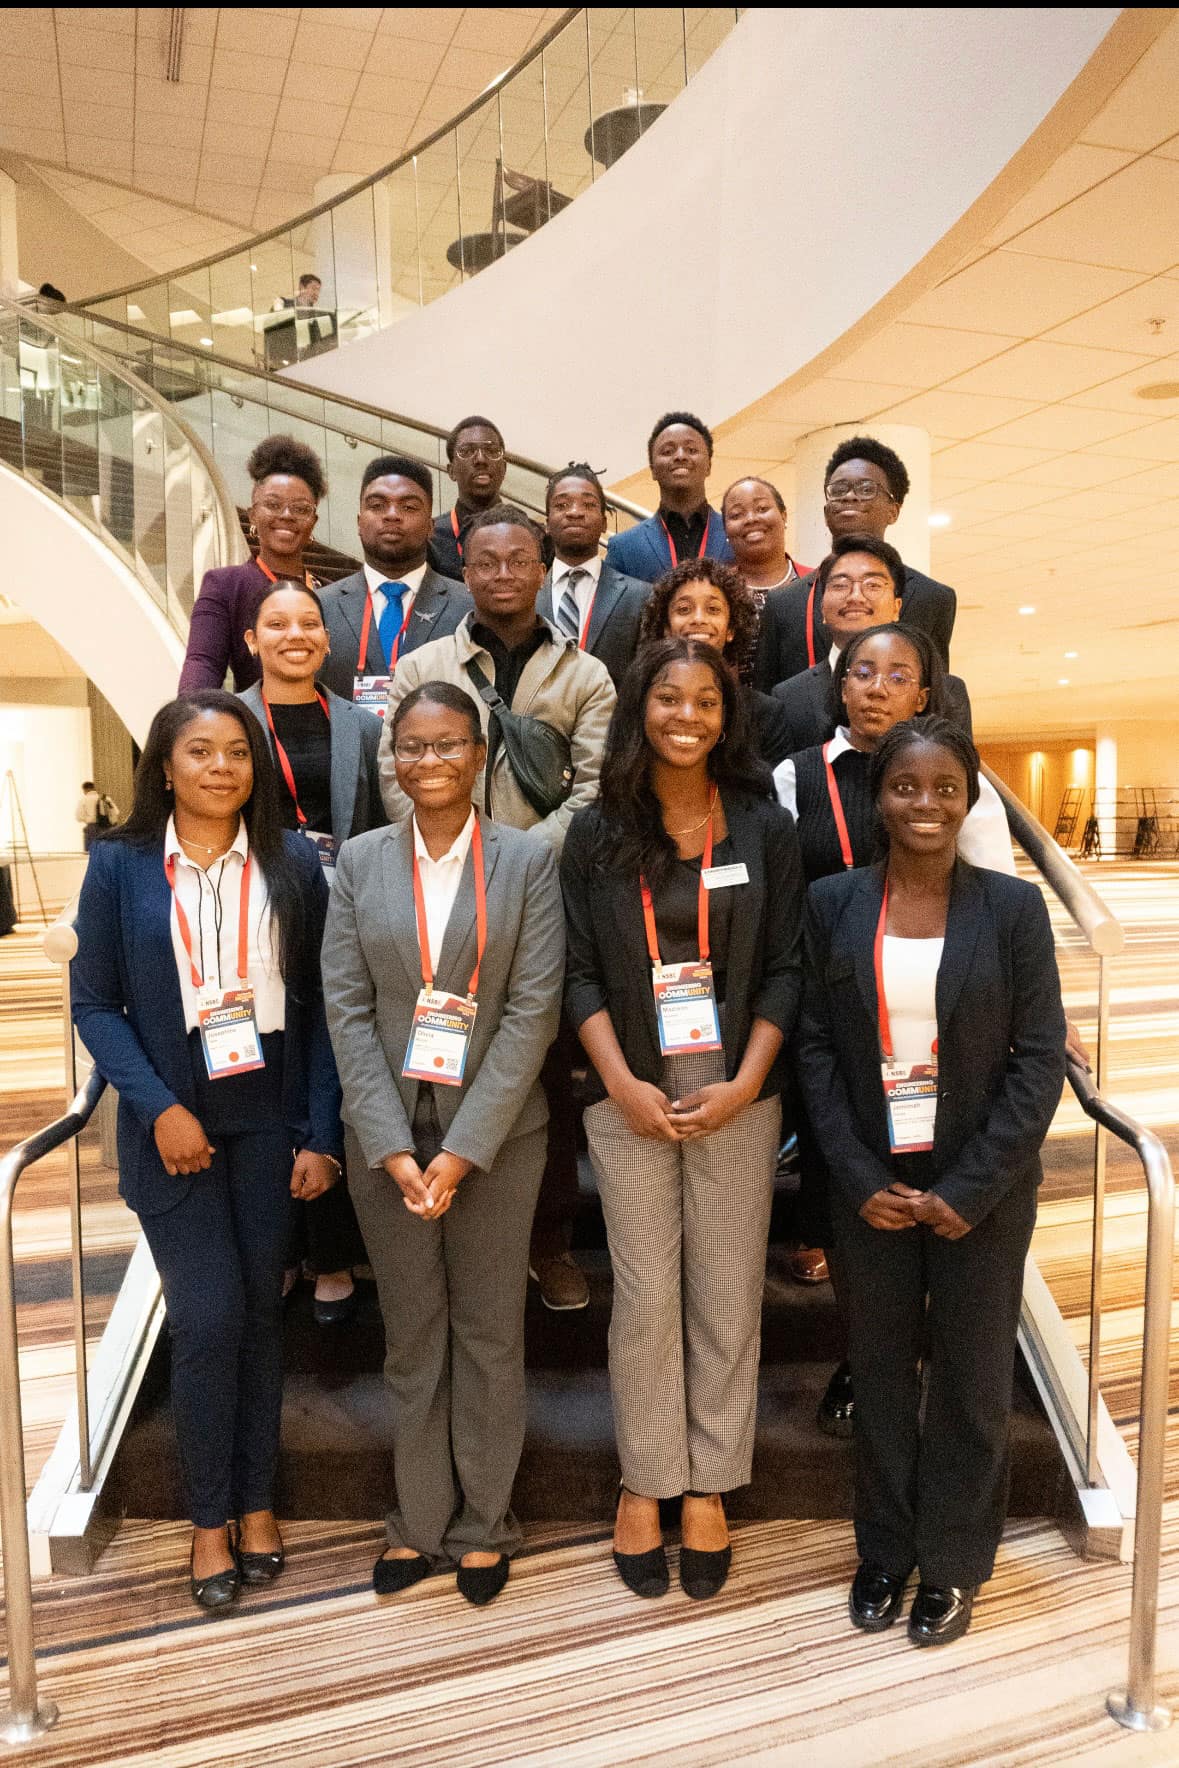 Embry-Riddle student Savannah Burke (pictured second row, far left) is membership chair of the Daytona Beach Campus’ National Society of Black Engineers (NSBE) chapter.